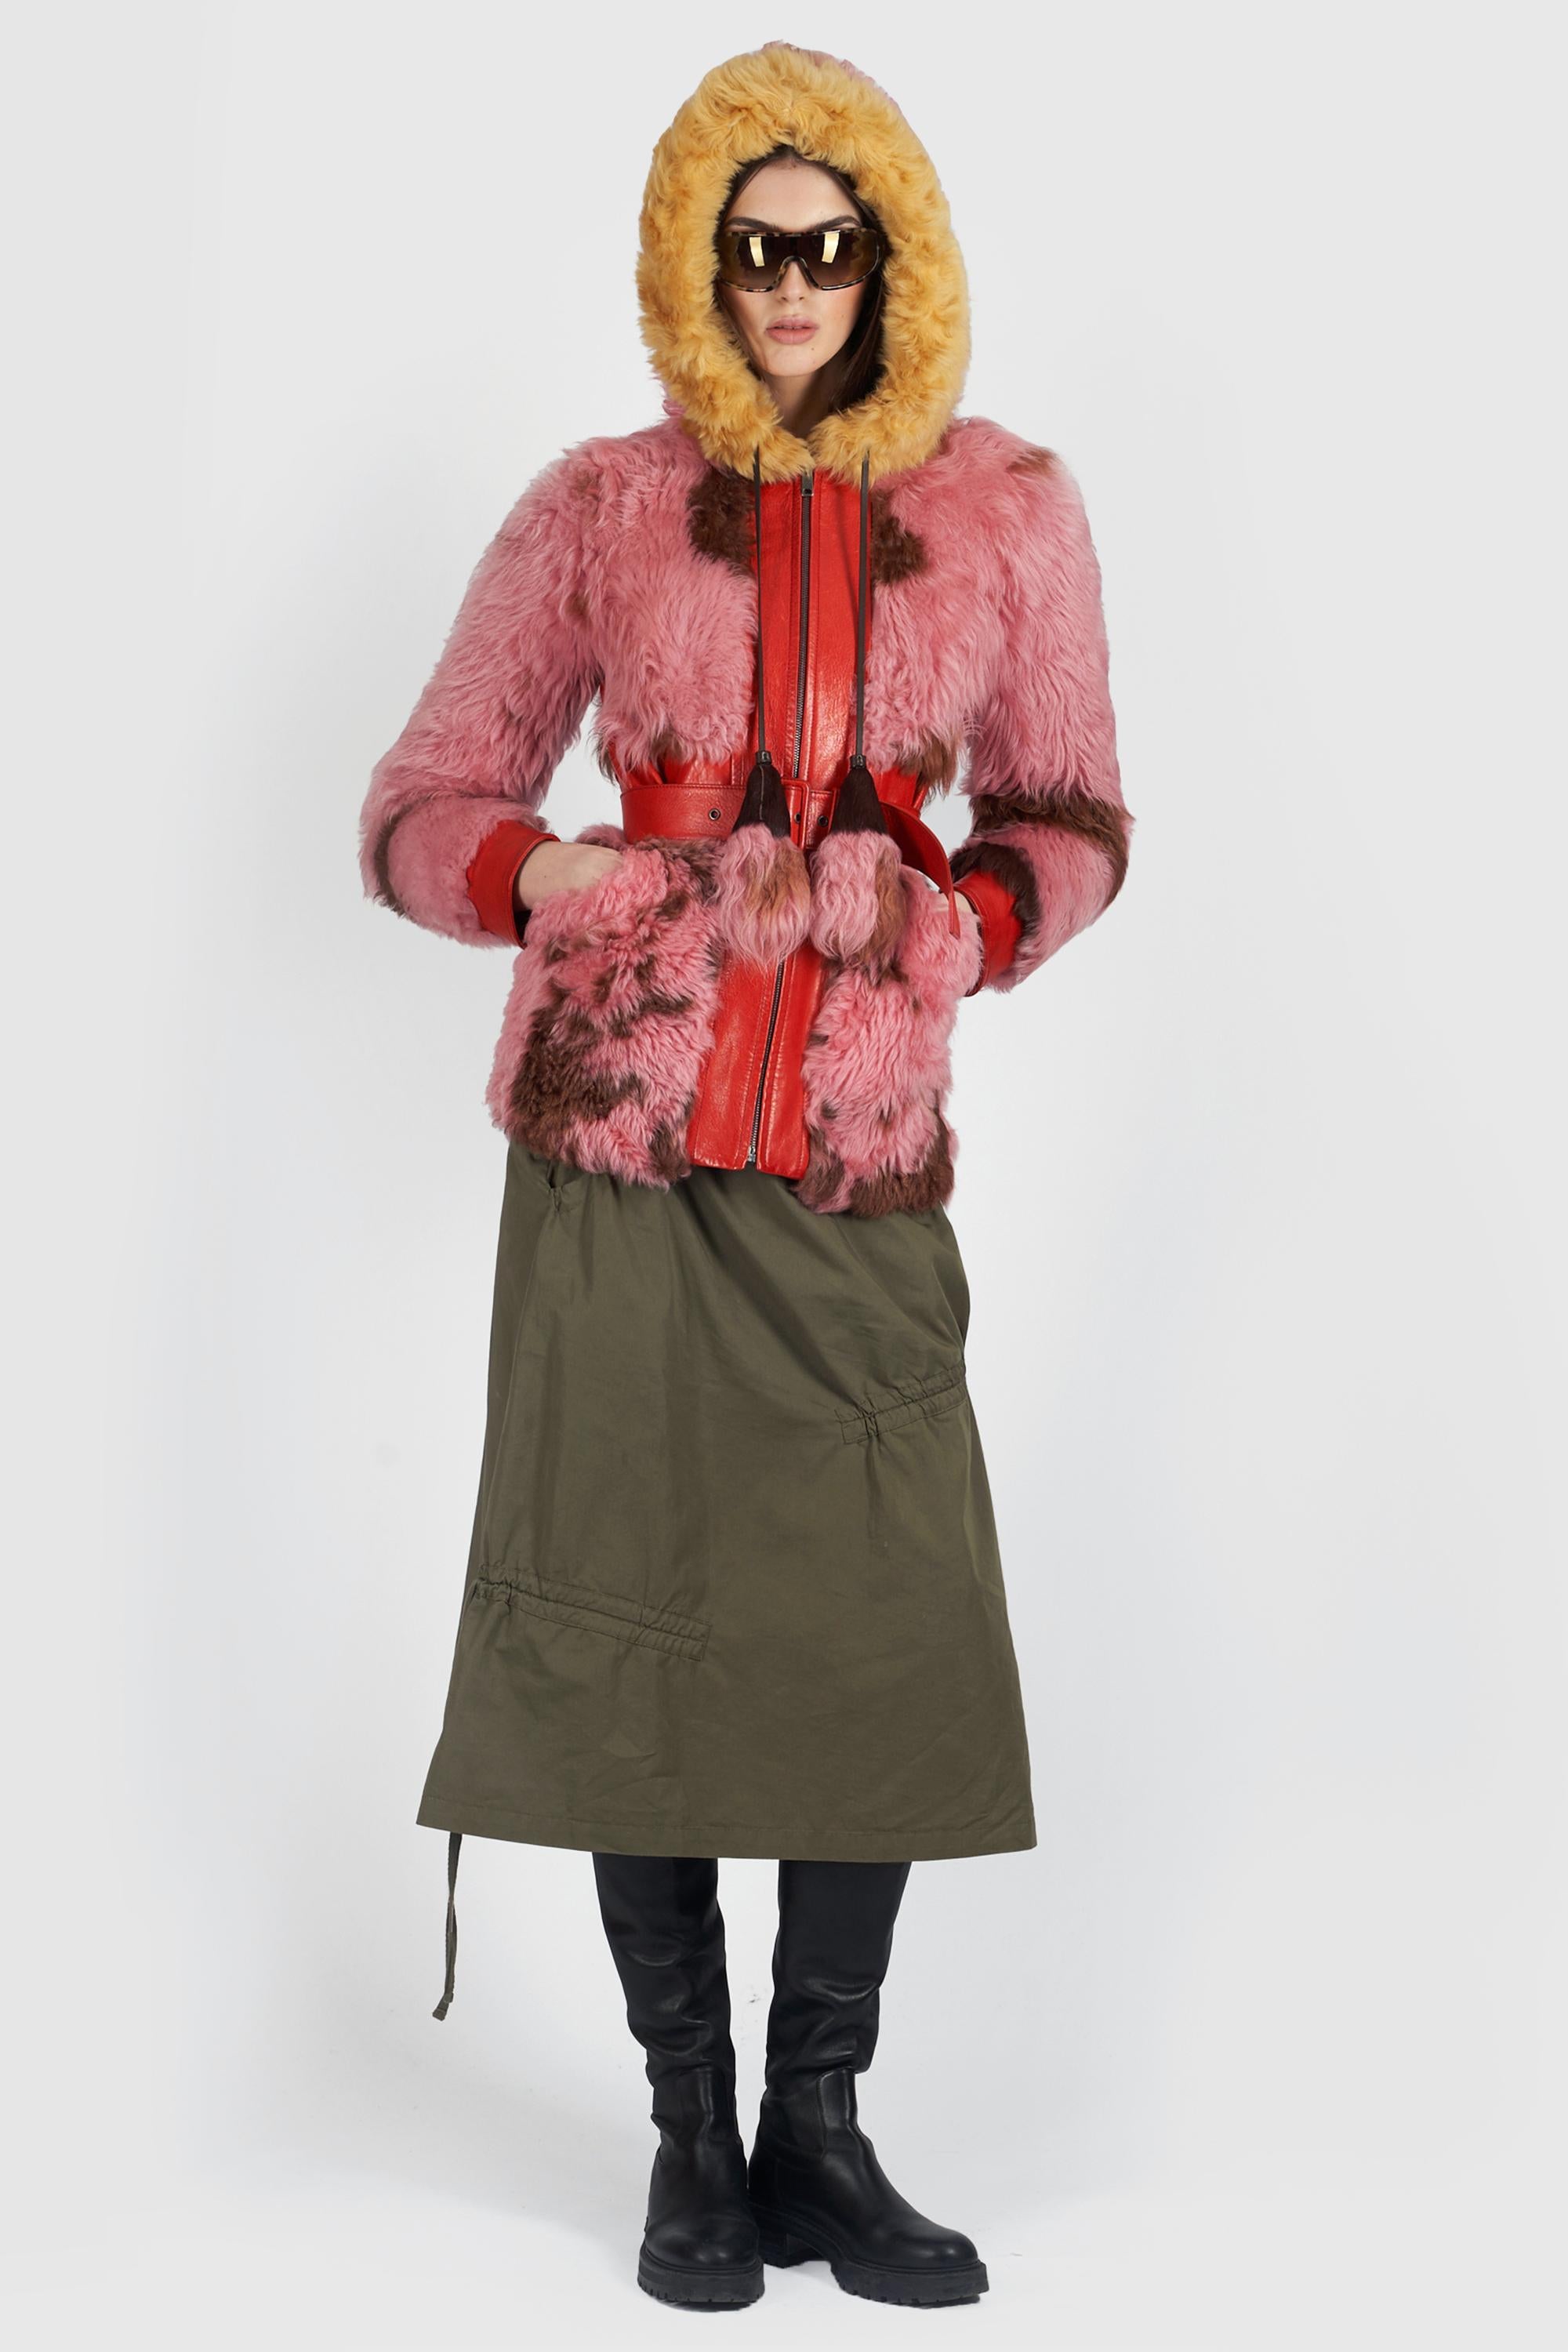 Prada F/W 2017 Runway Pink Shearling Coat In Good Condition For Sale In London, GB